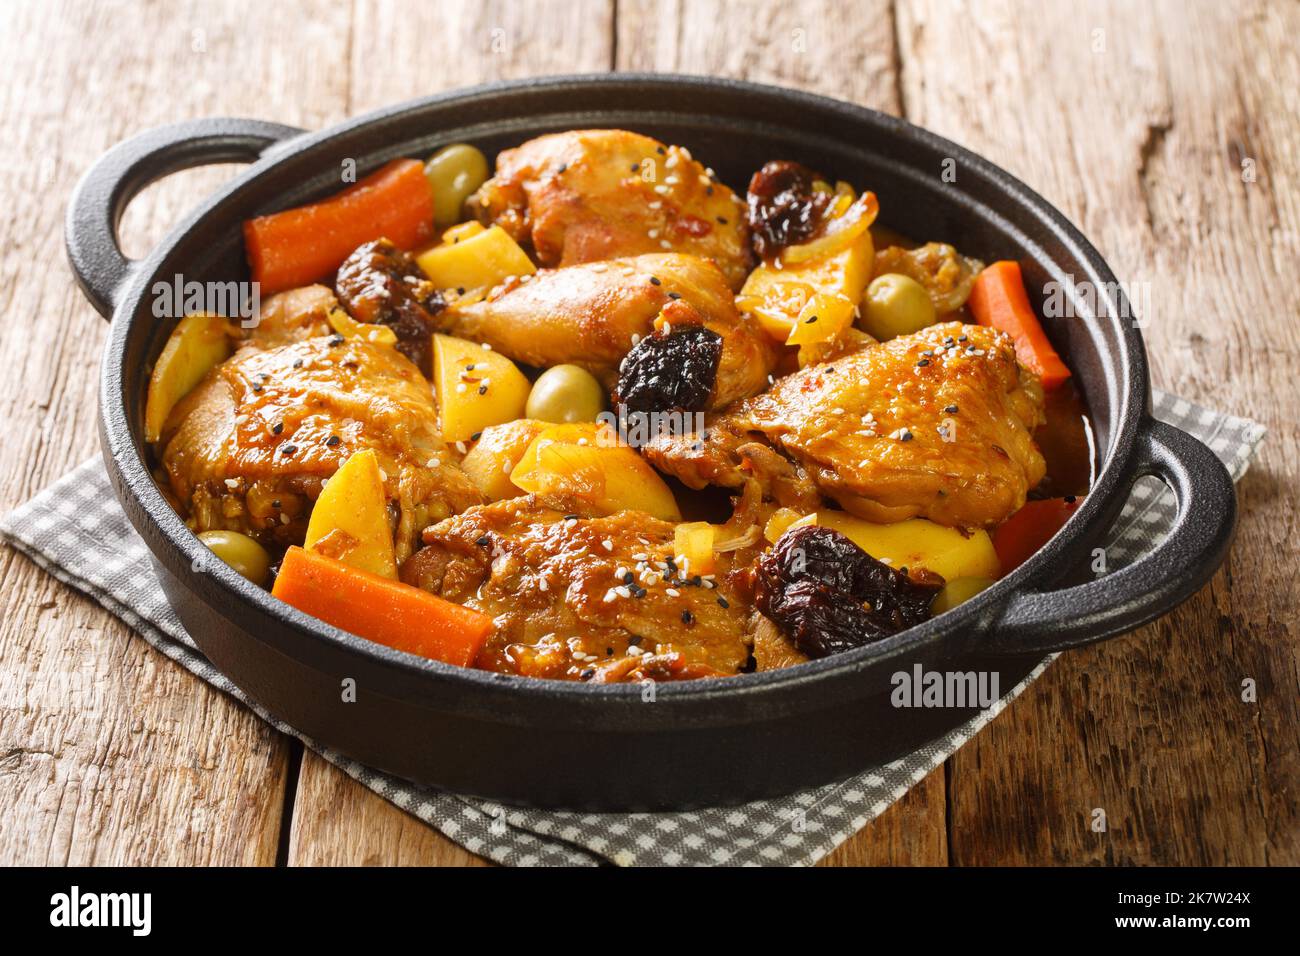 Salvadoran chicken stew with chicha, prunes, carrots, potatoes, olives and onions close-up in a frying pan on a wooden table. Horizontal Stock Photo